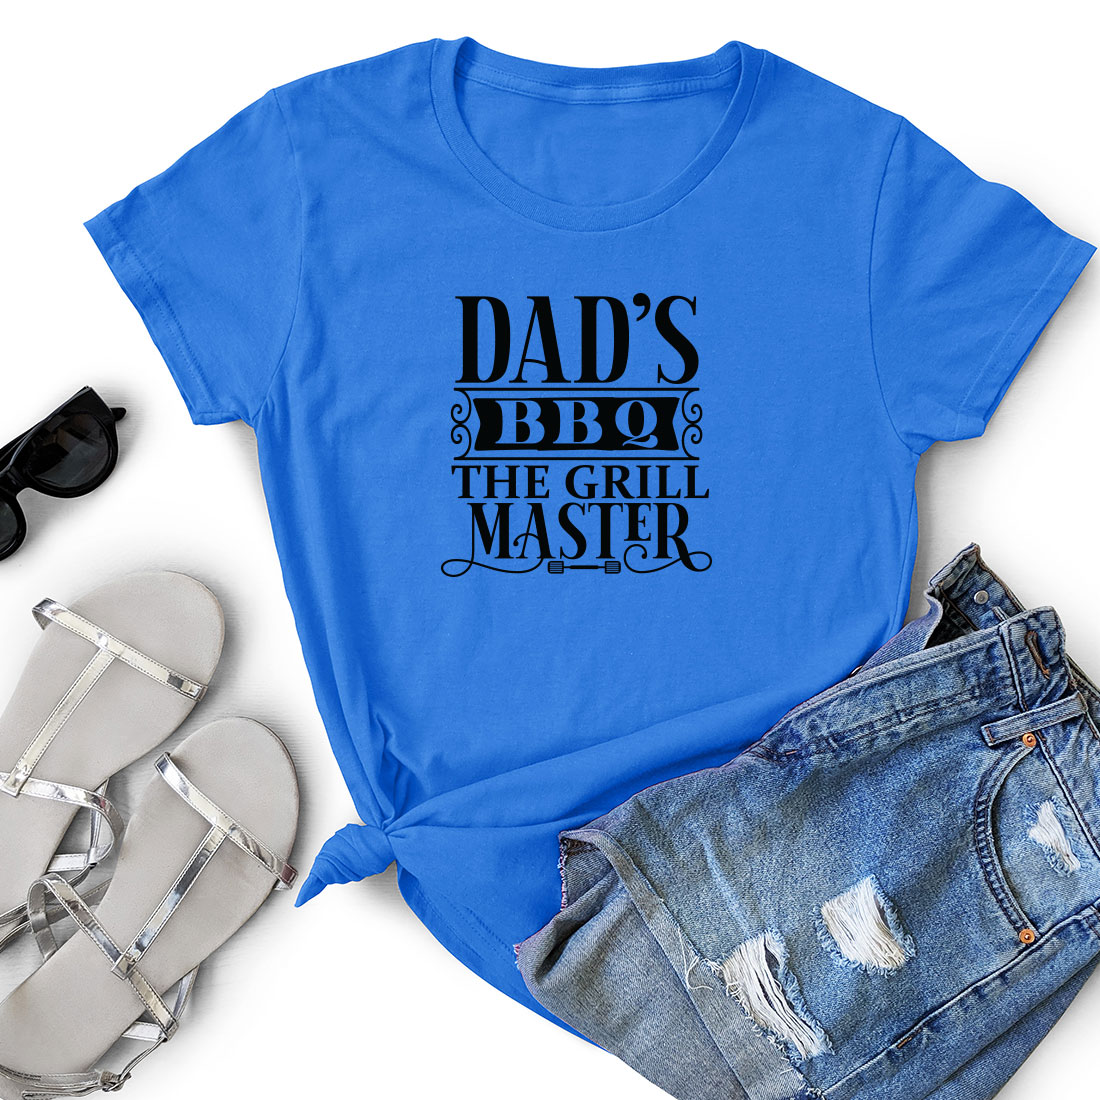 T - shirt that says dad's bbq the grill master.